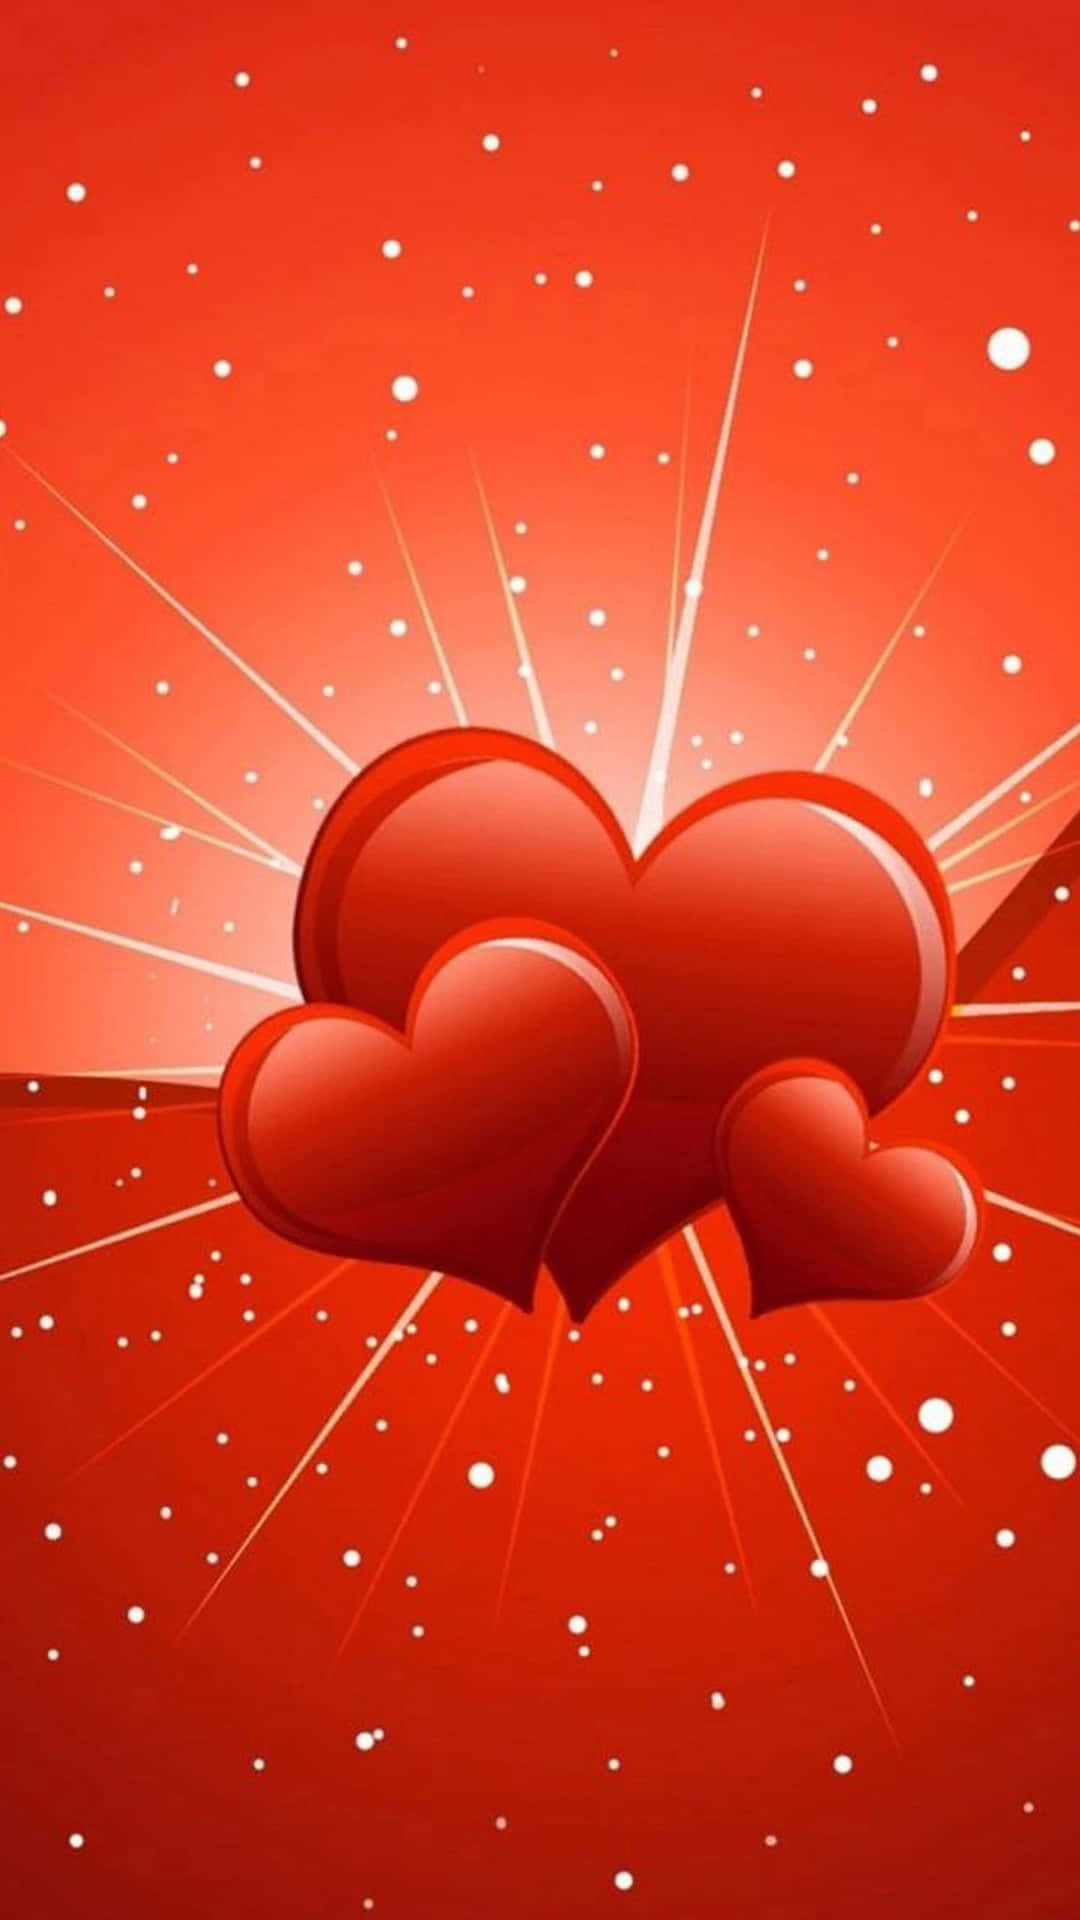 Two Hearts On A Red Background With Stars Background